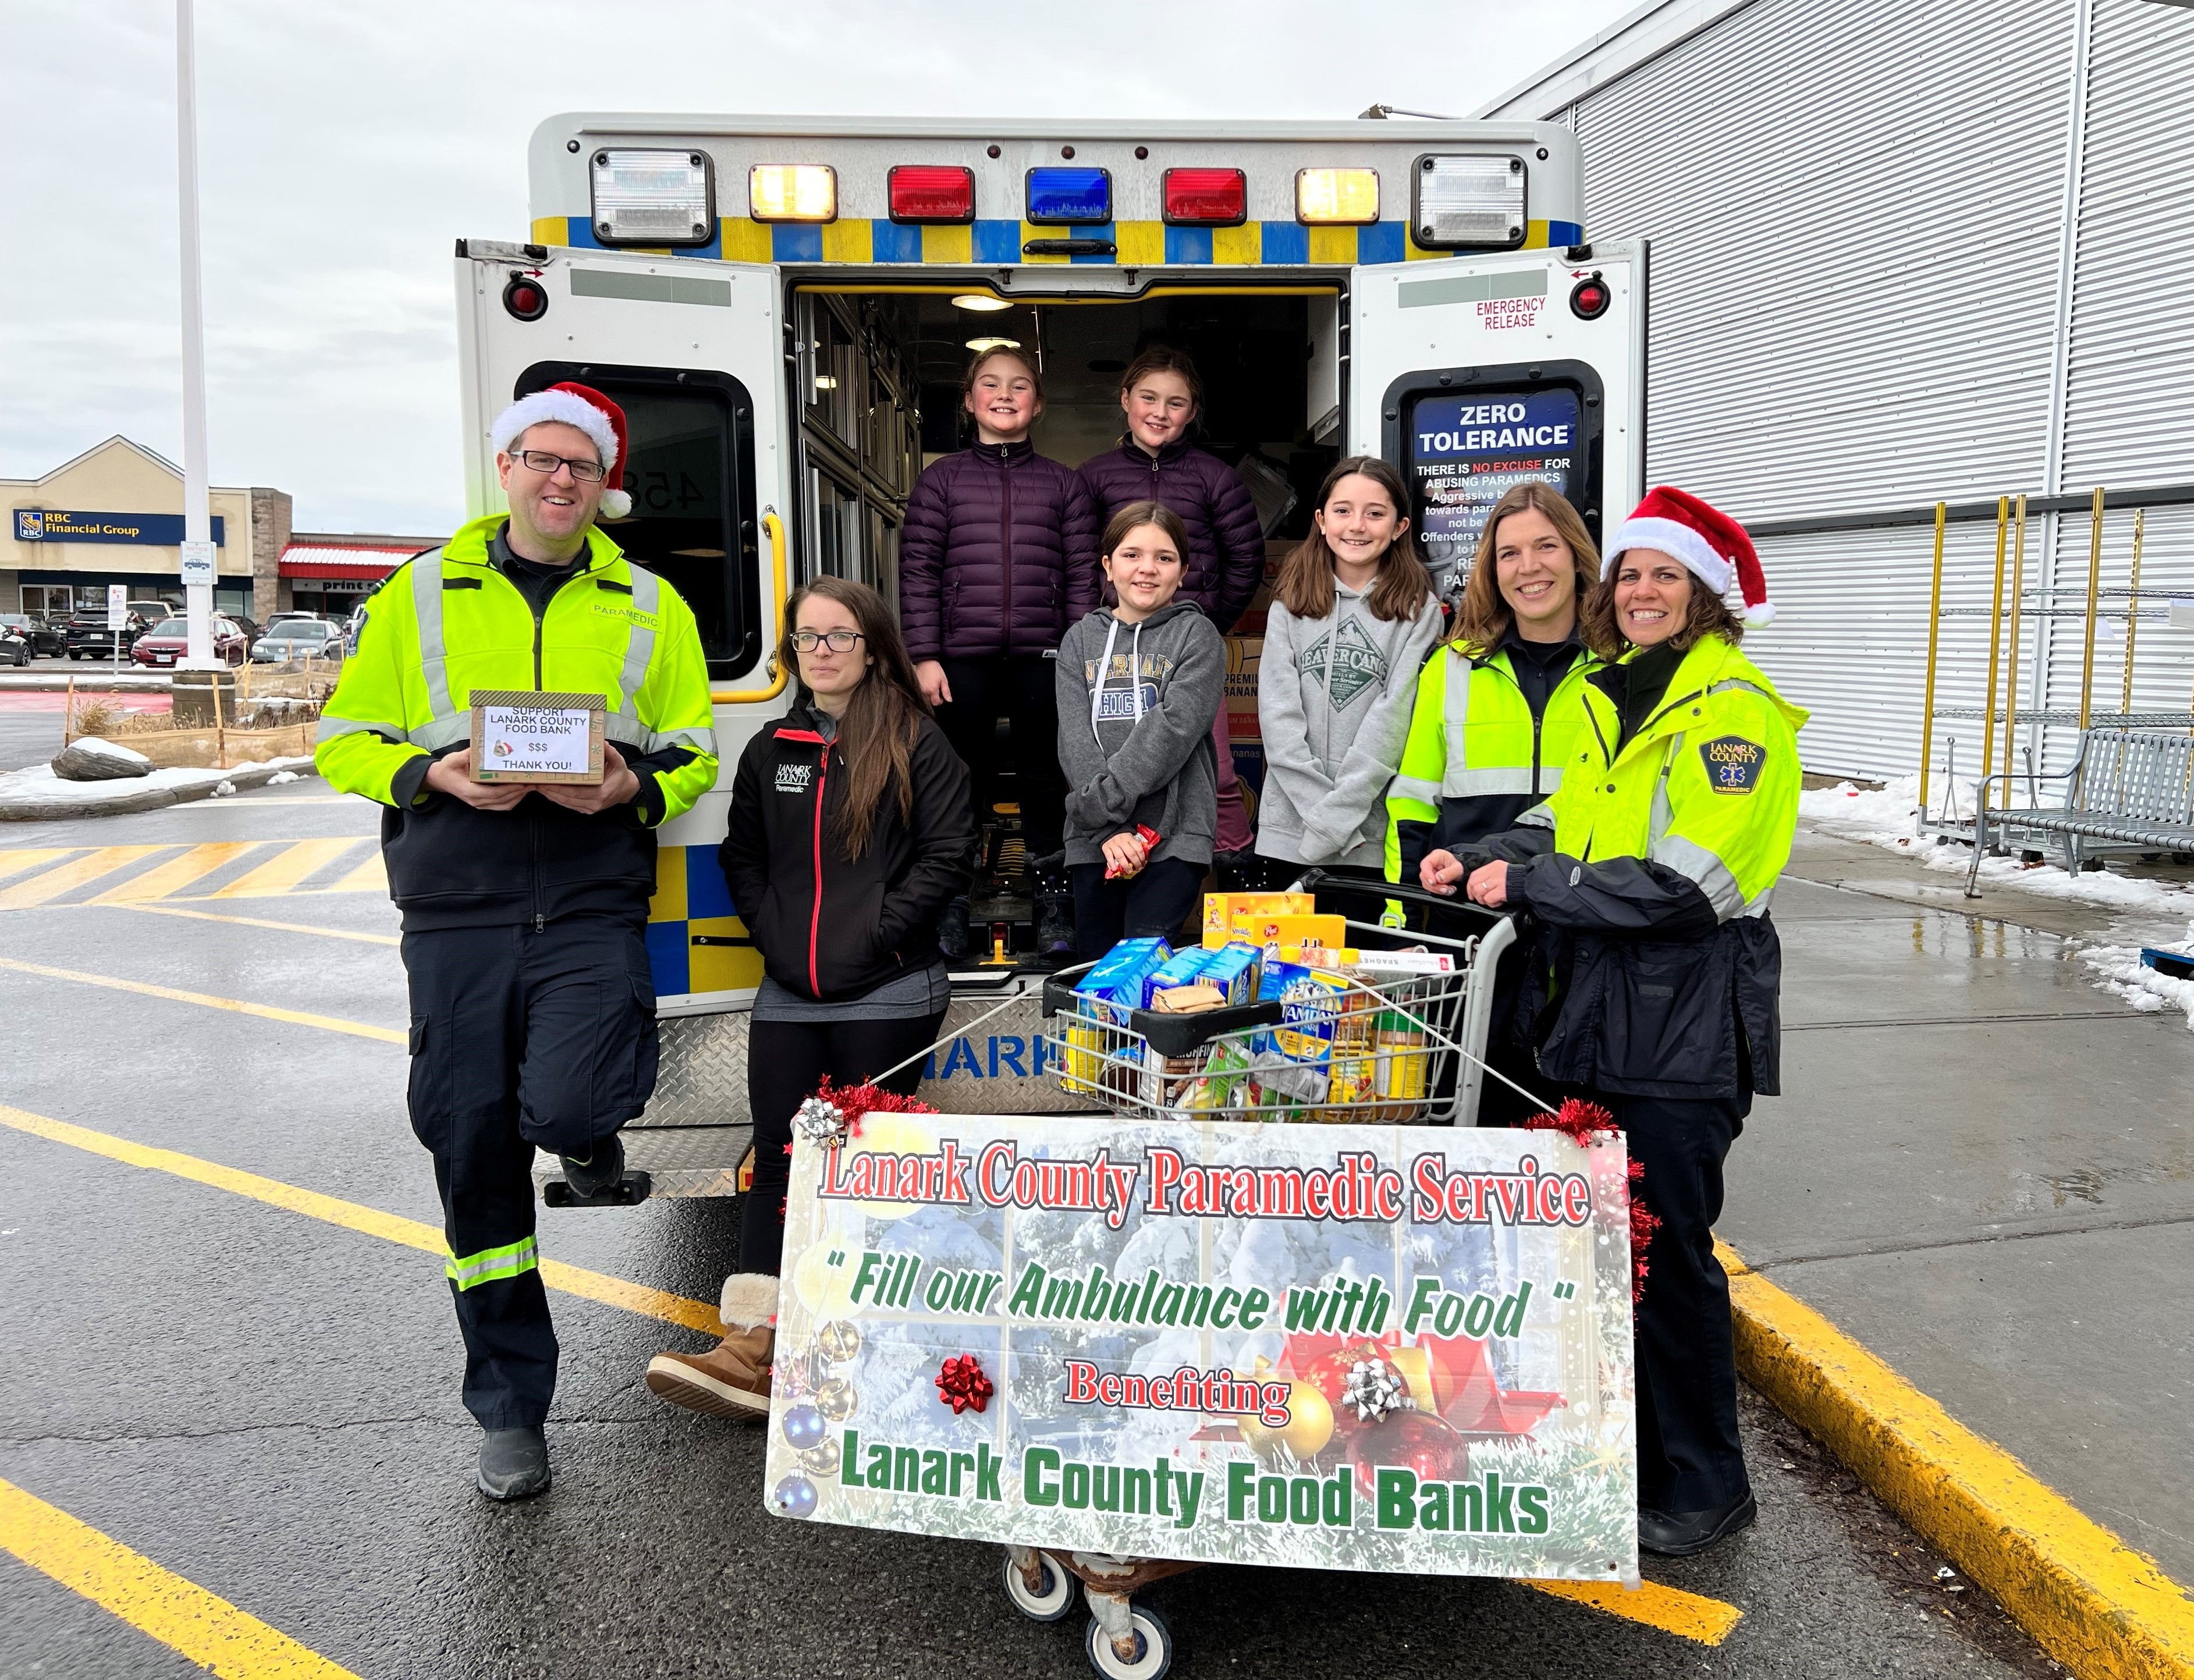 Paramedic service members and volunteers stand at the back of an ambulance with a food drive sign